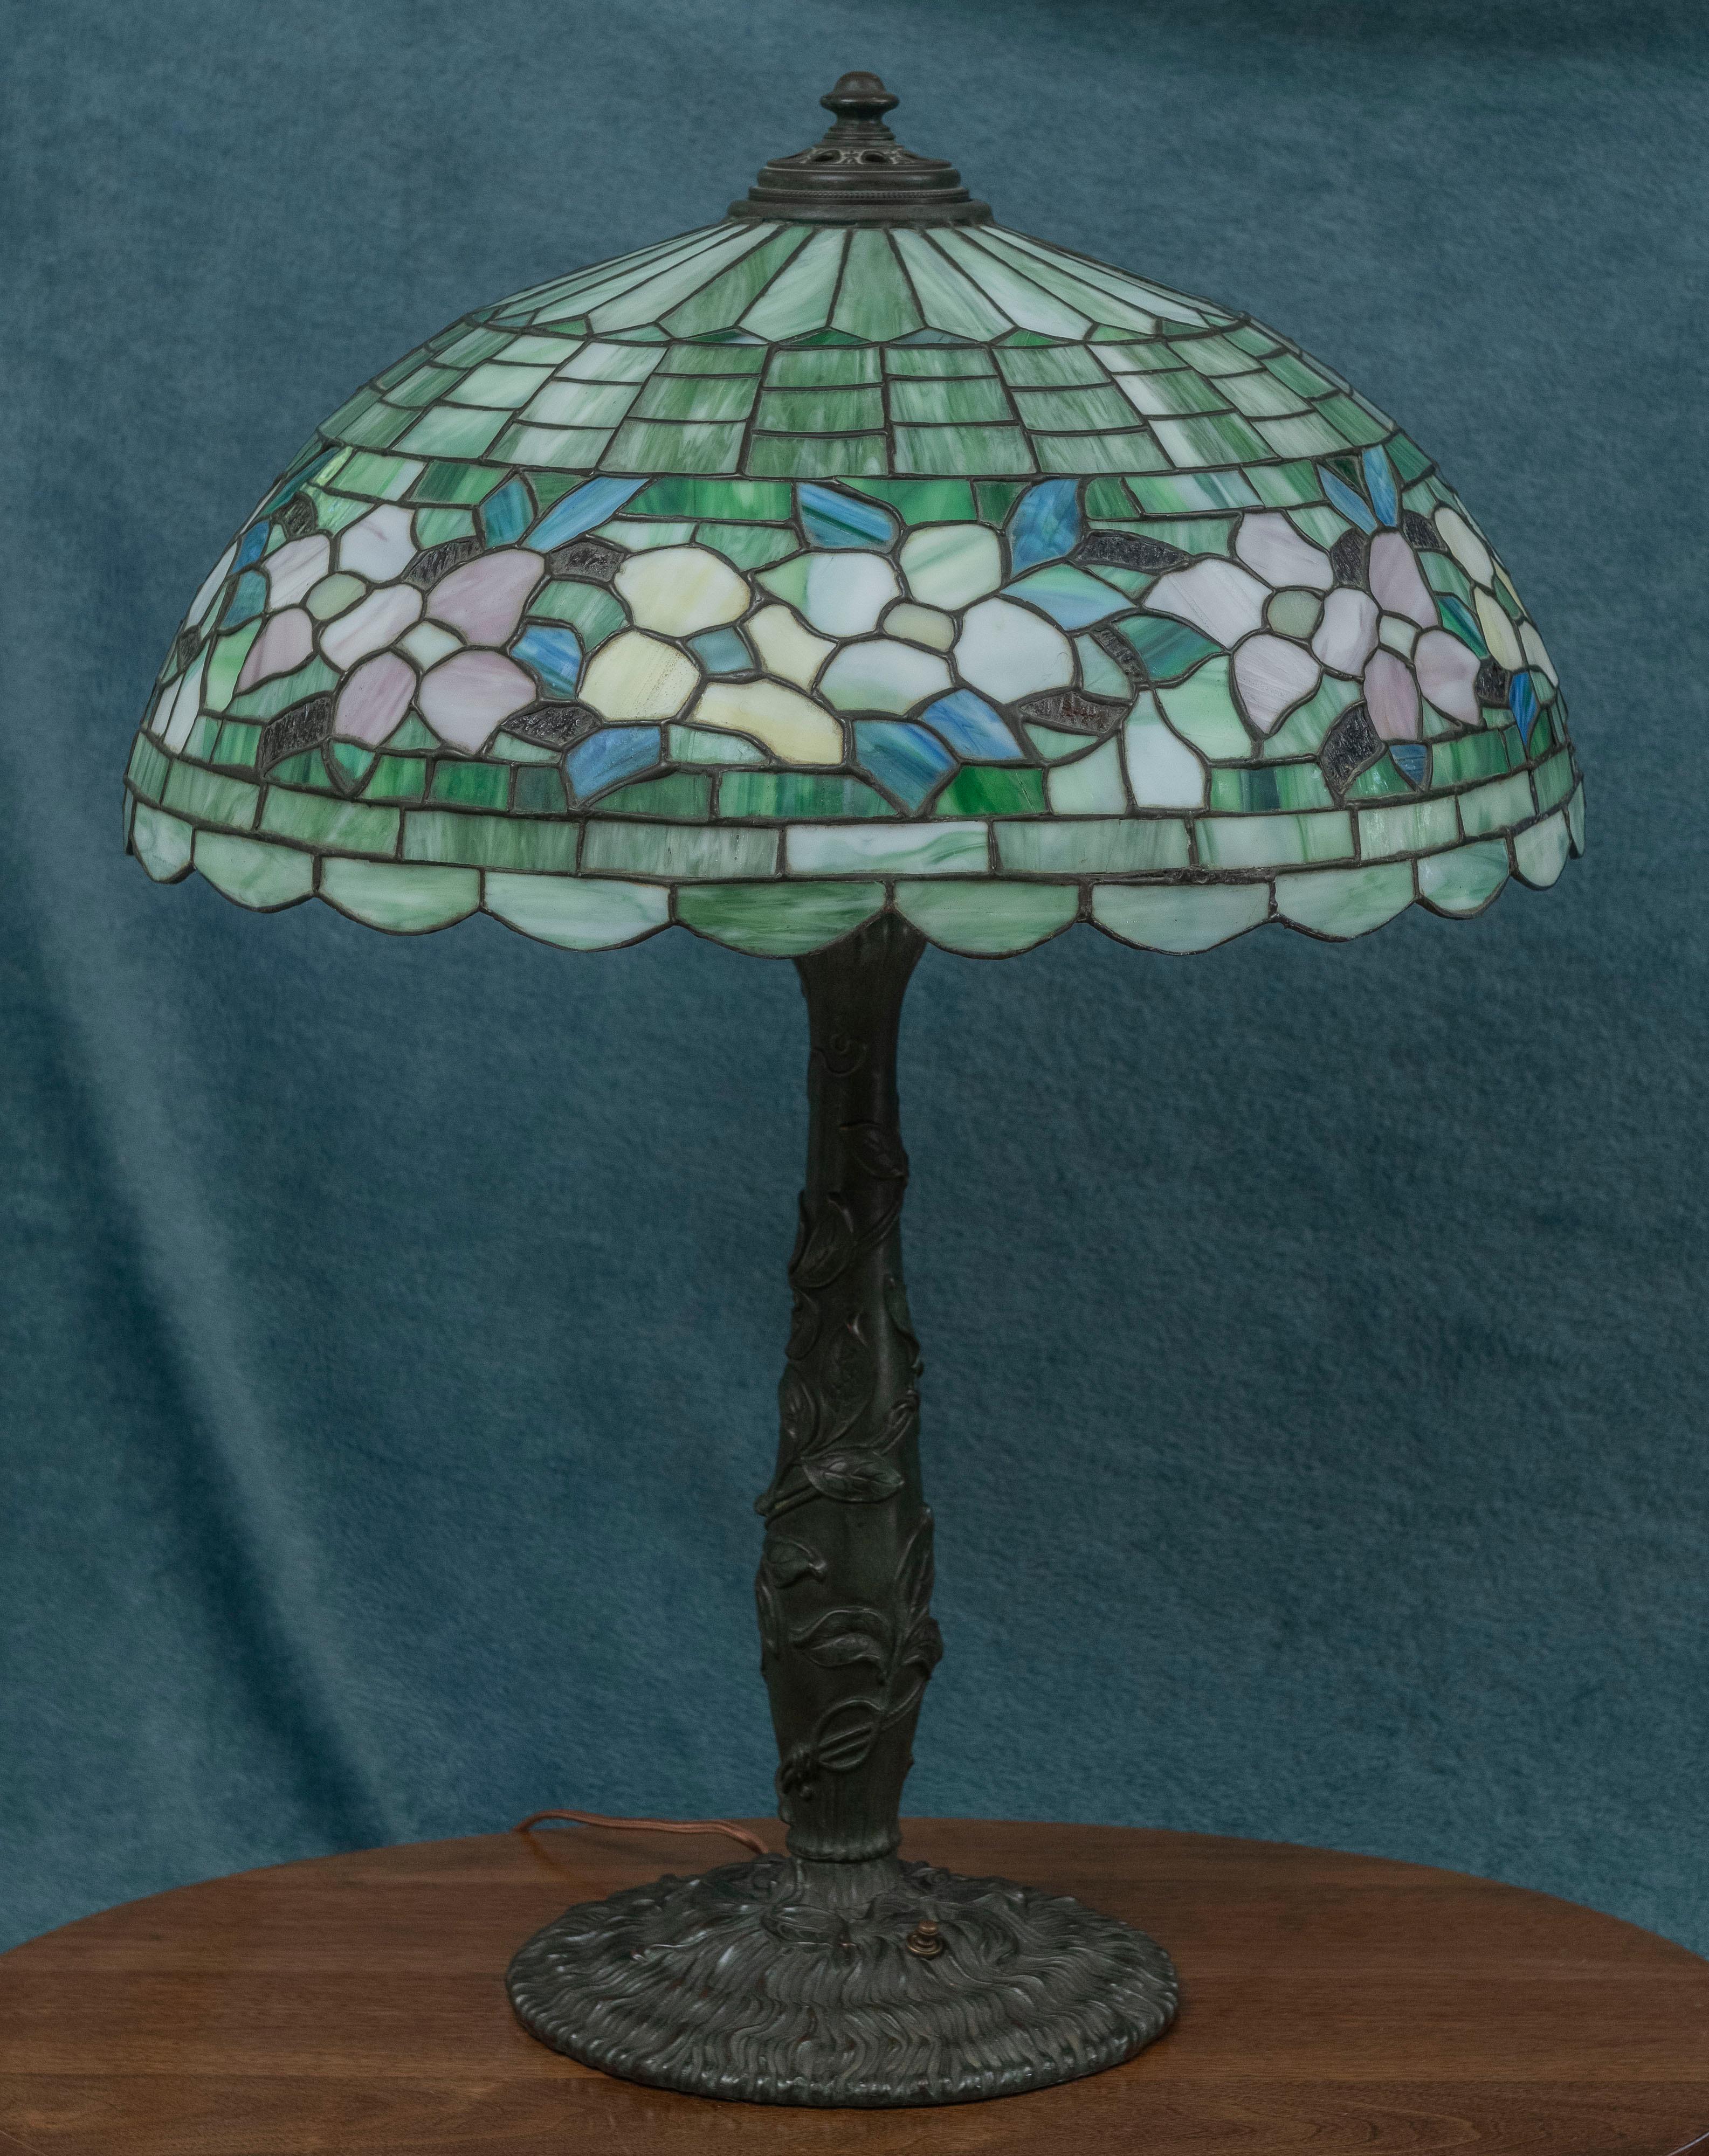 Large Antique Leaded Glass Table Lamp by Wilkinson Co. B'klyn N.Y ca. 1910 For Sale 3